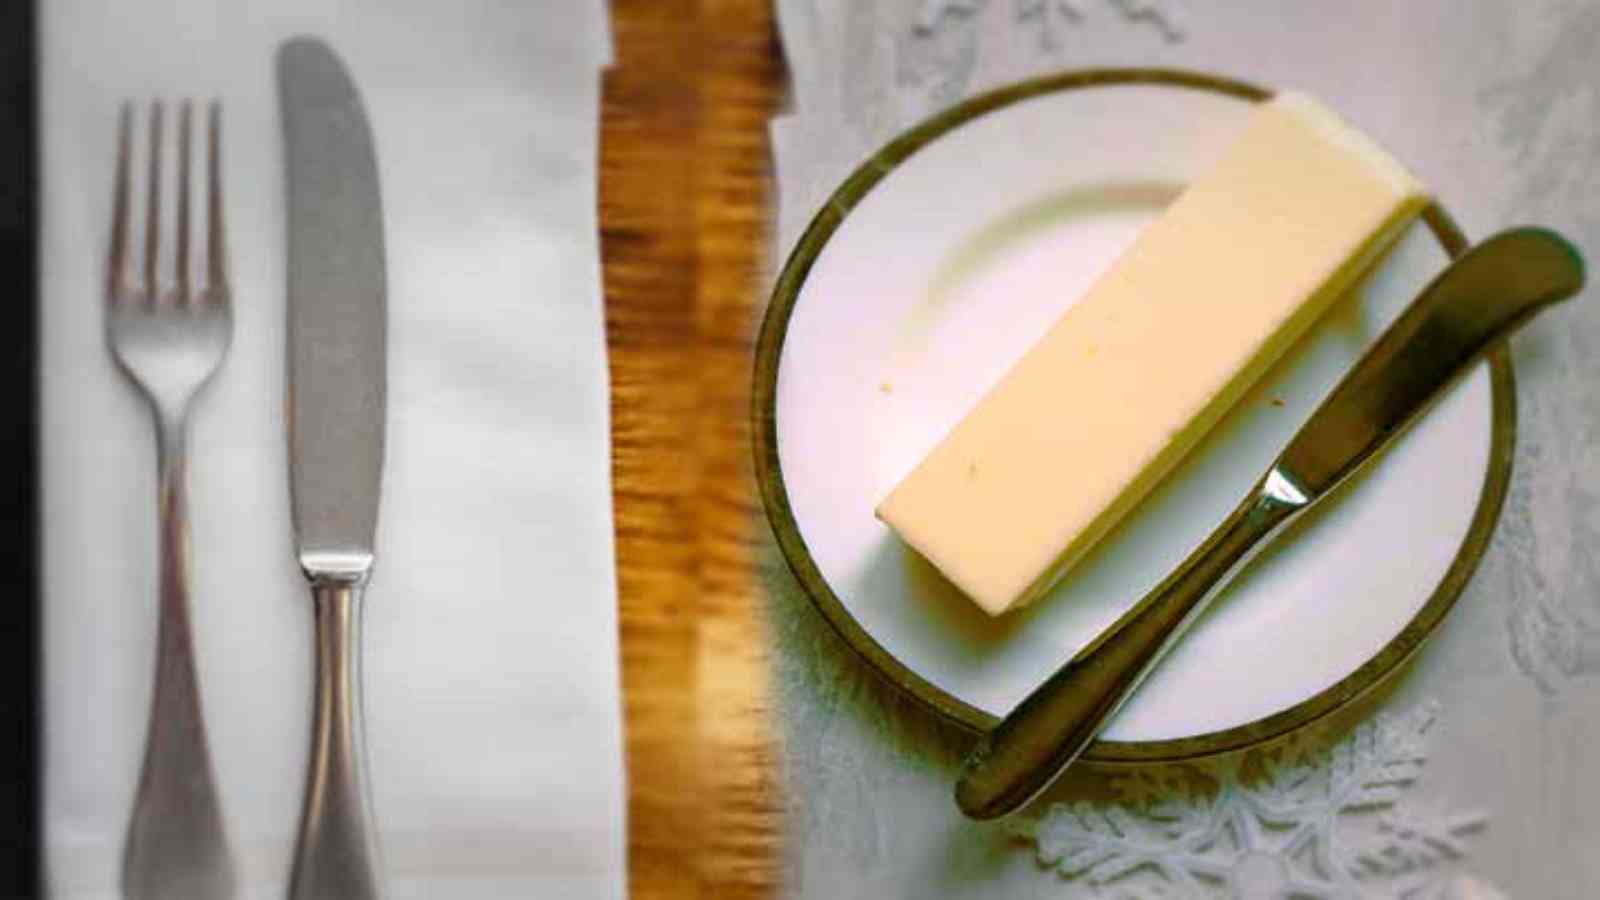 Dinner Knife vs Butter Knife: What’s the difference?